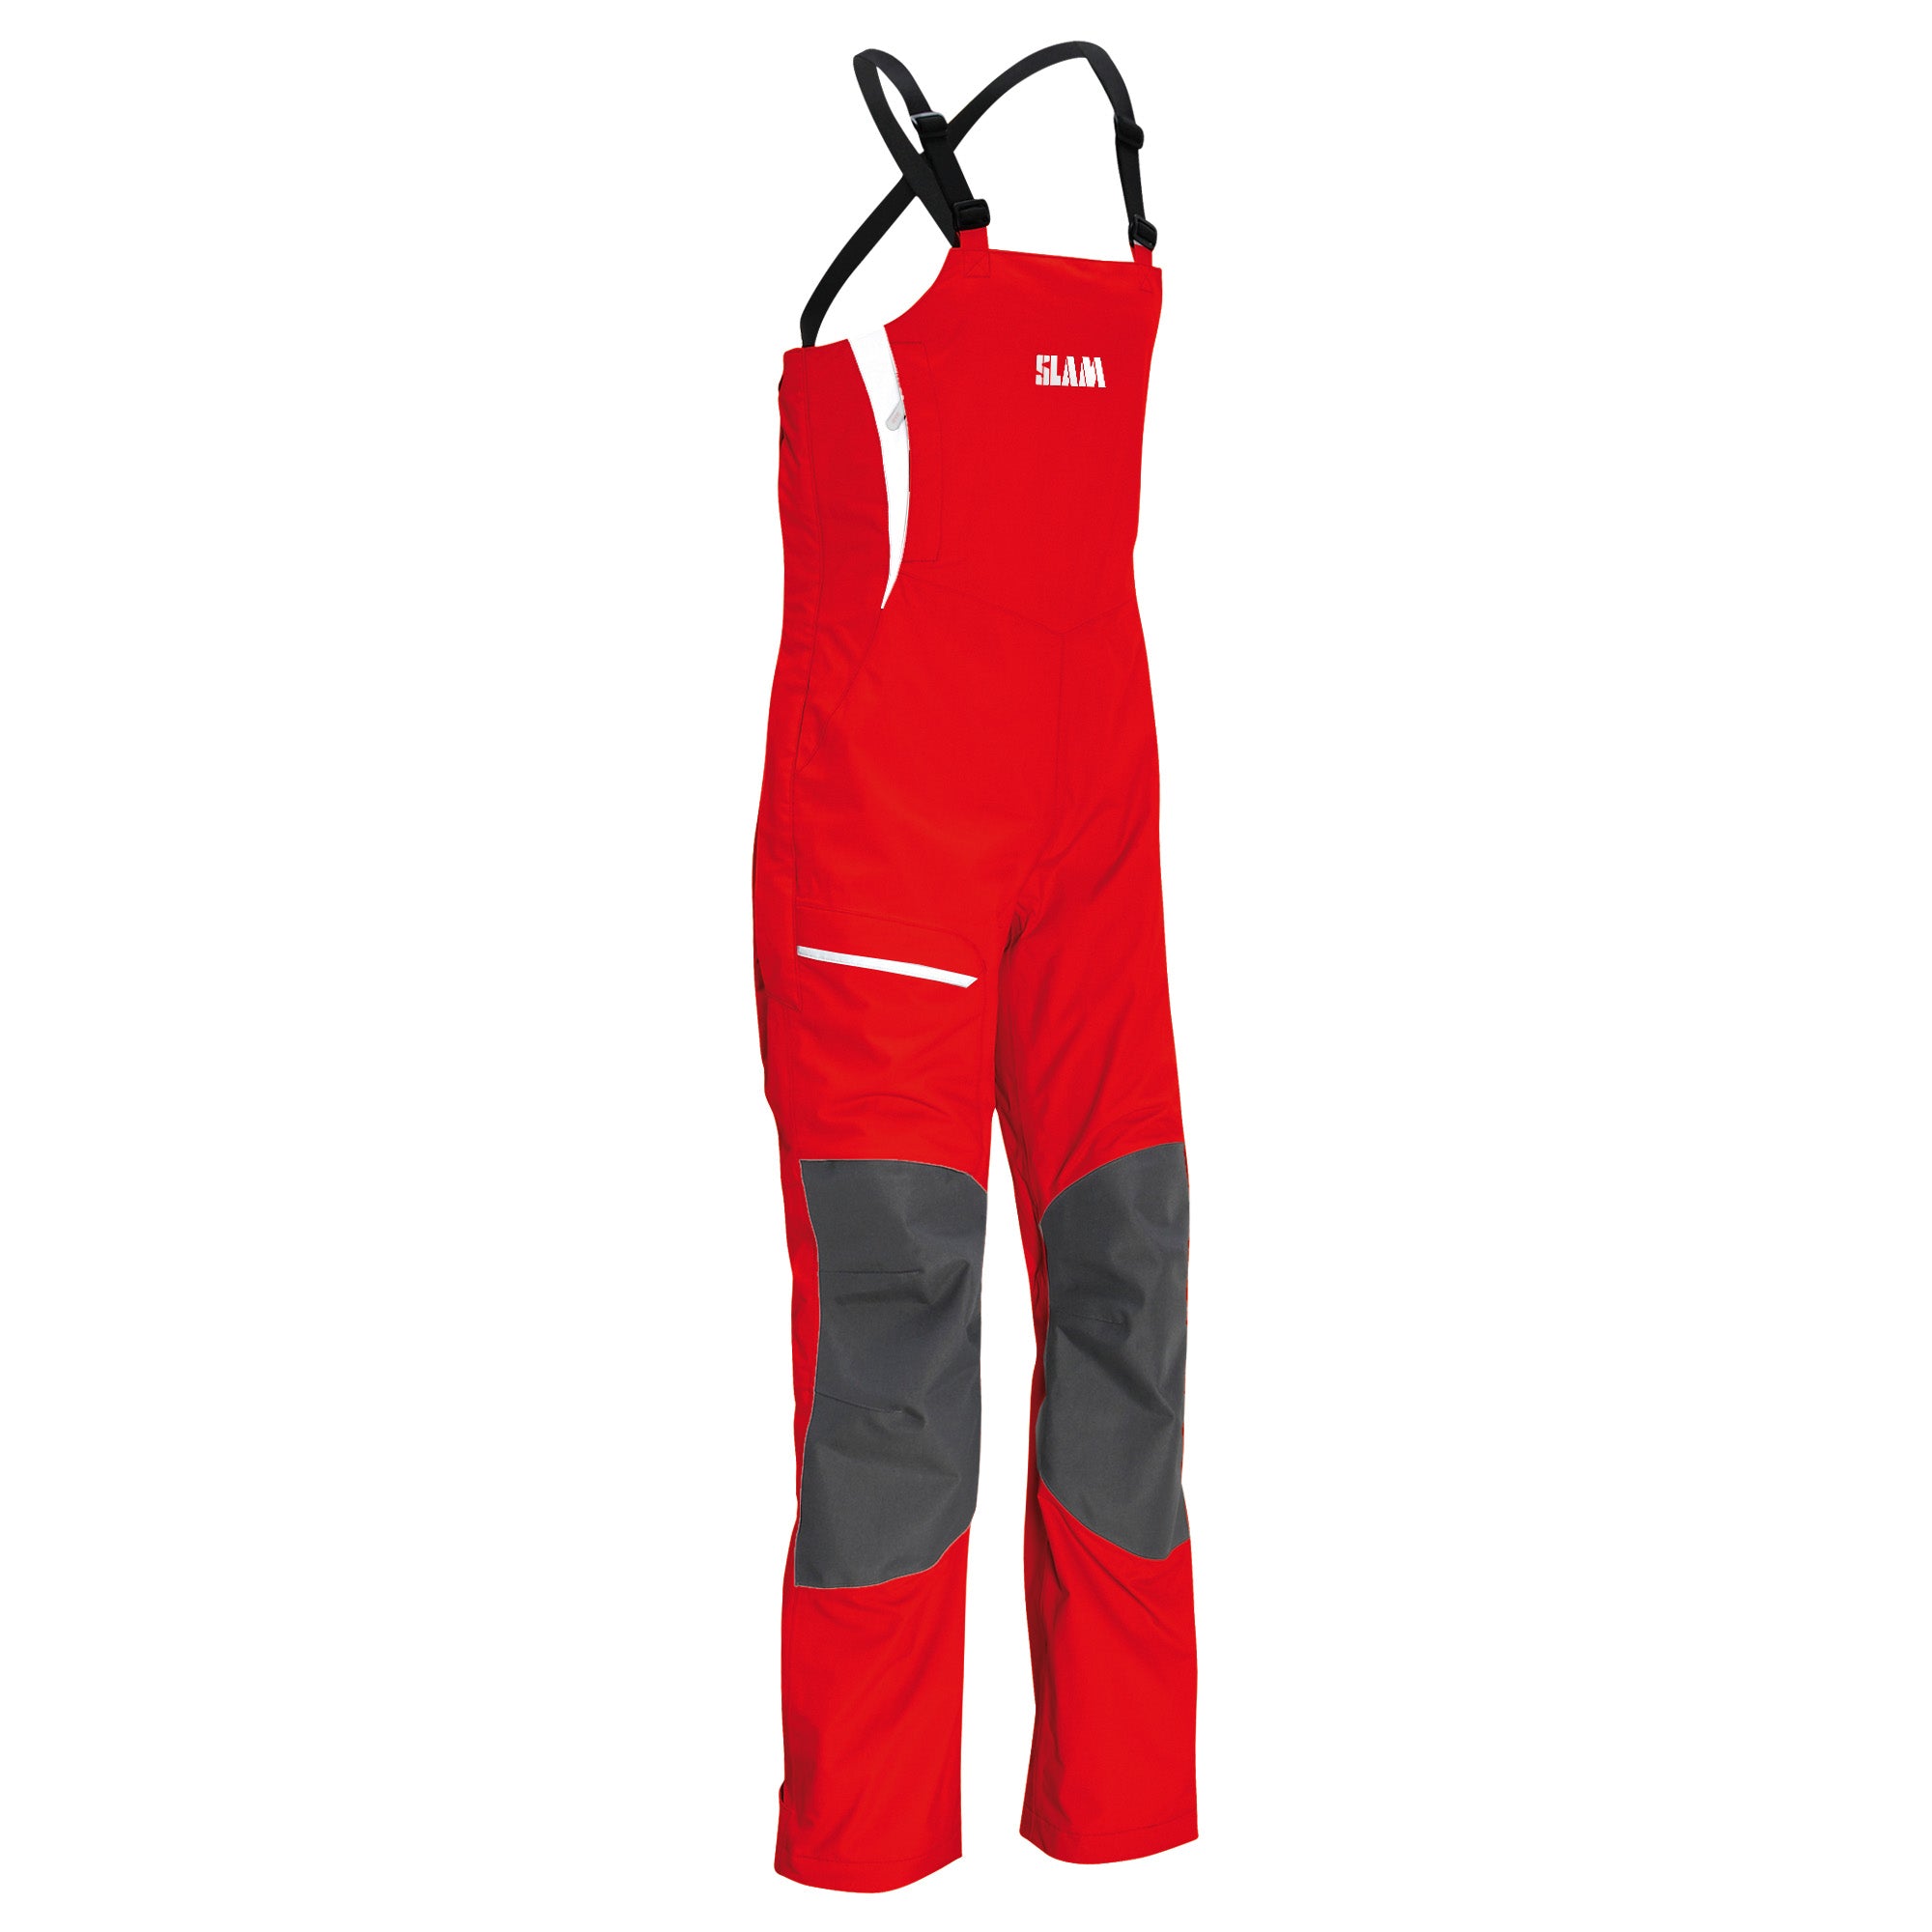 S904182S00_SLAM_FORCE_2_Trousers_Woman_Farbe_SLAM_RED_625